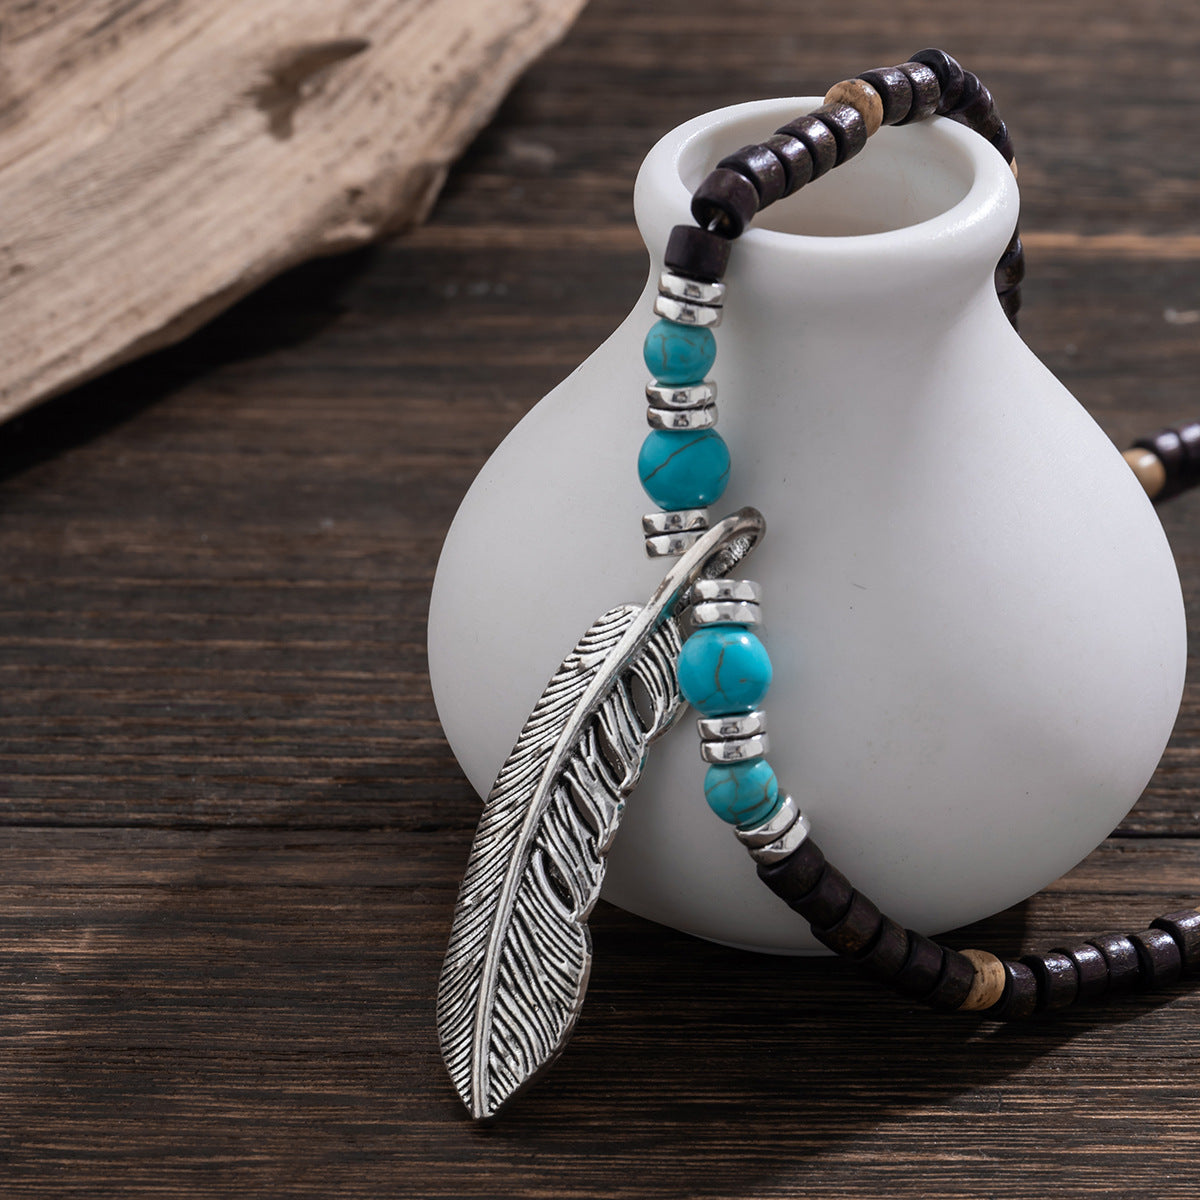 Exquisite and trendy mosaic wooden beads and turquoise with feather design pendant necklace - Syble's